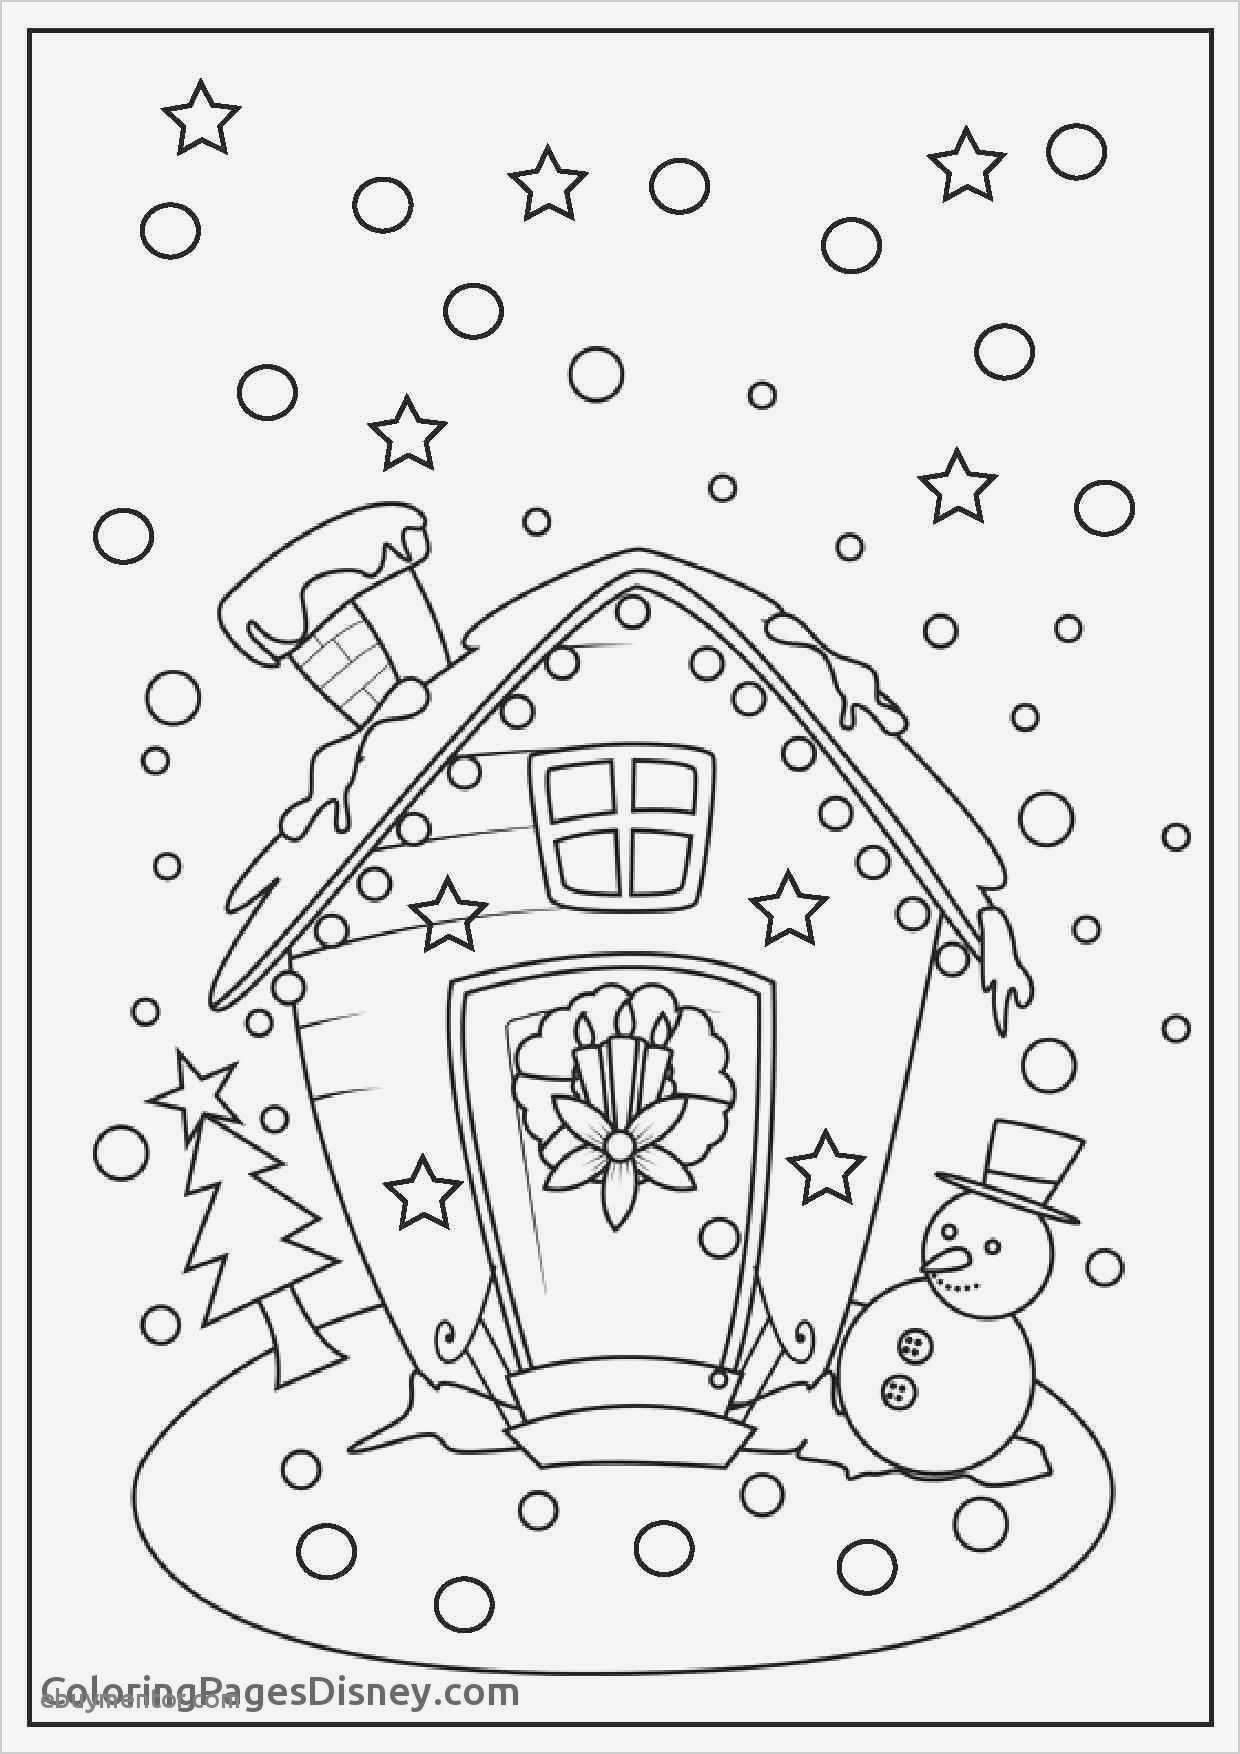 Candyland Characters Coloring Pages Lovely Candyland Coloring Pages Fvgiment